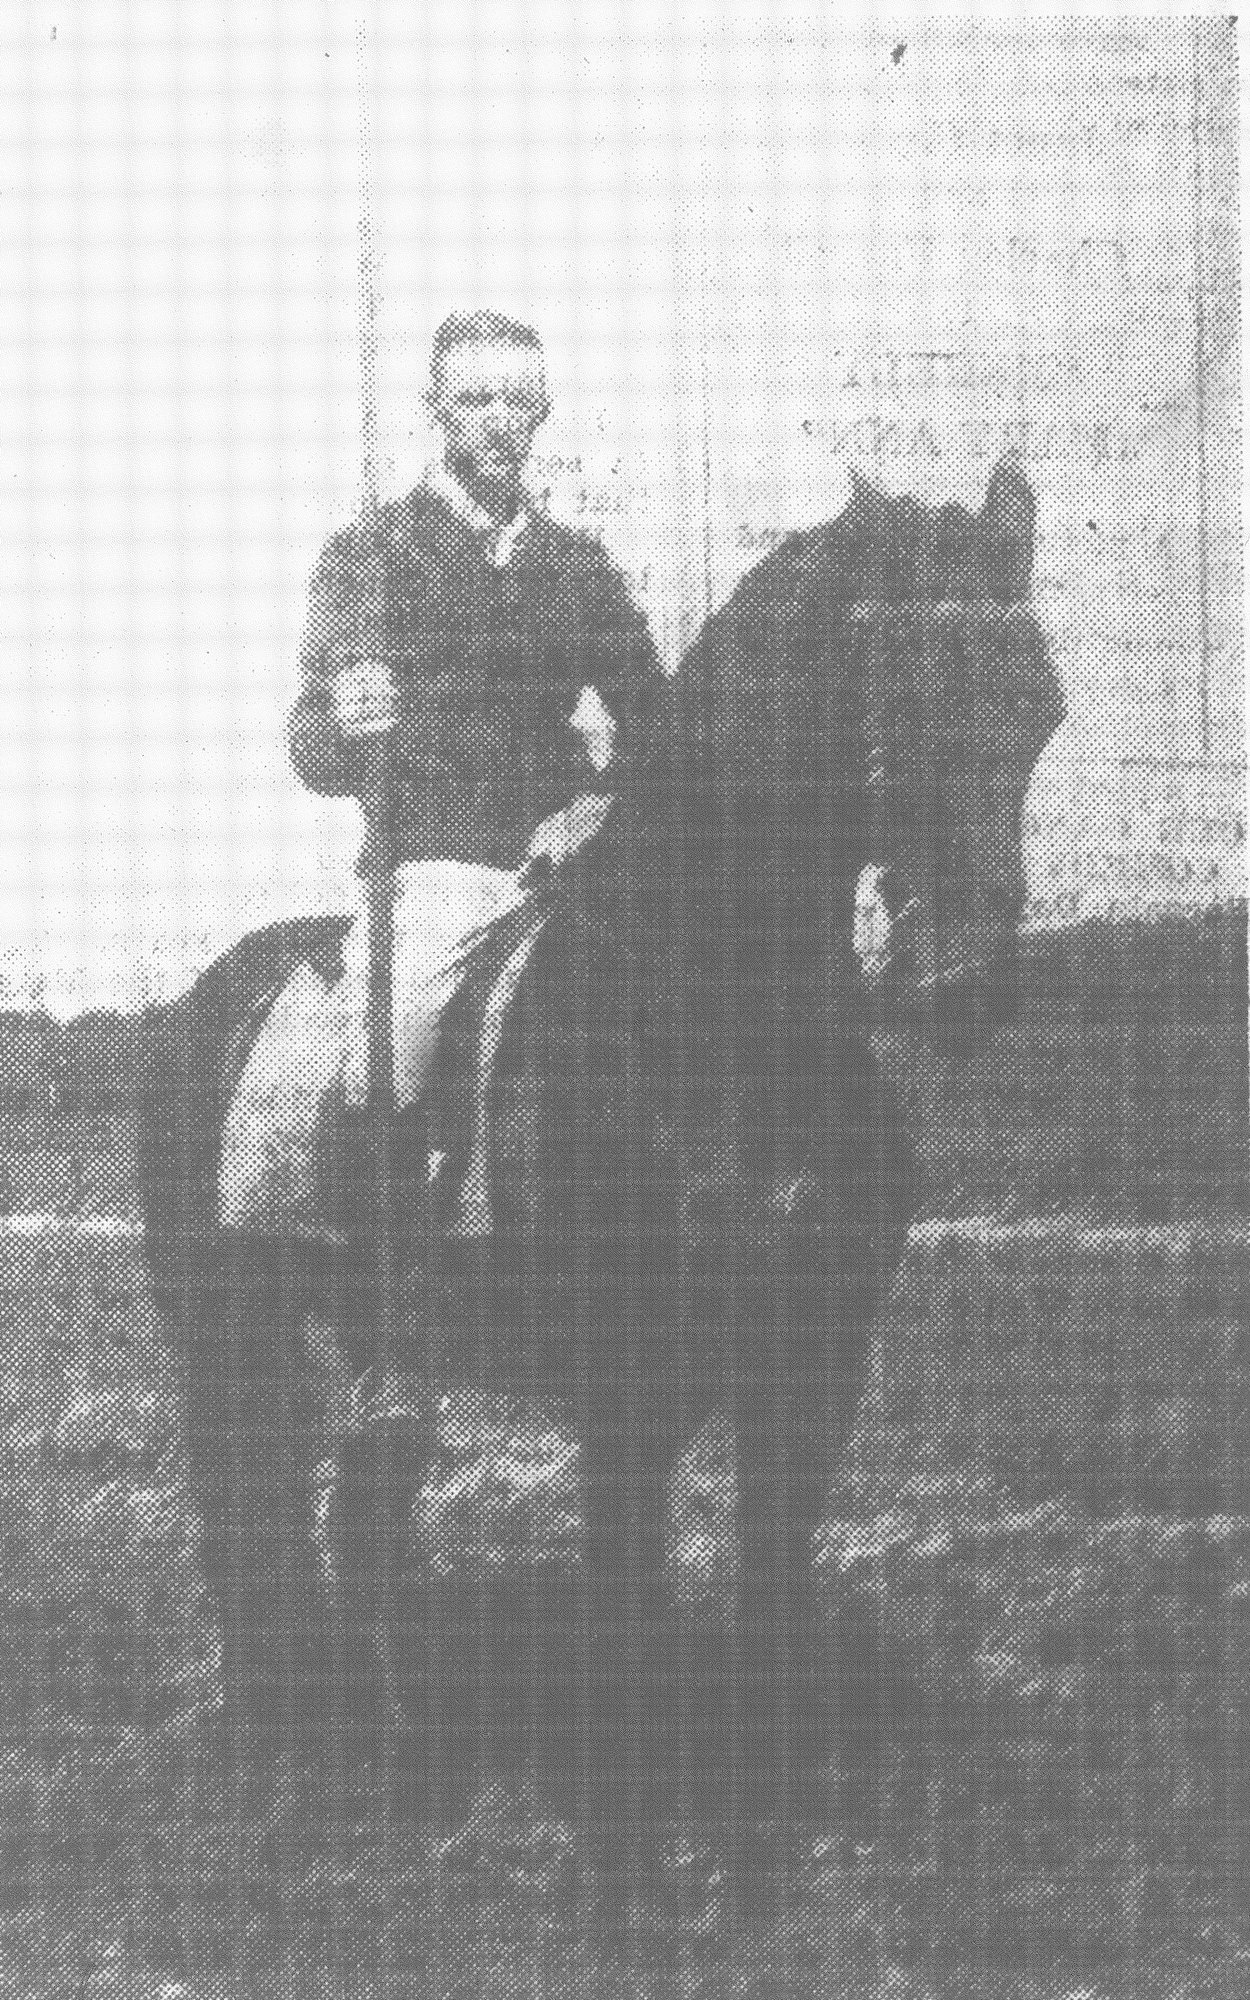 S. A. Harvin planned to ride his horse Ginger in a tilting tournament at Sumter County Fair in 1931.